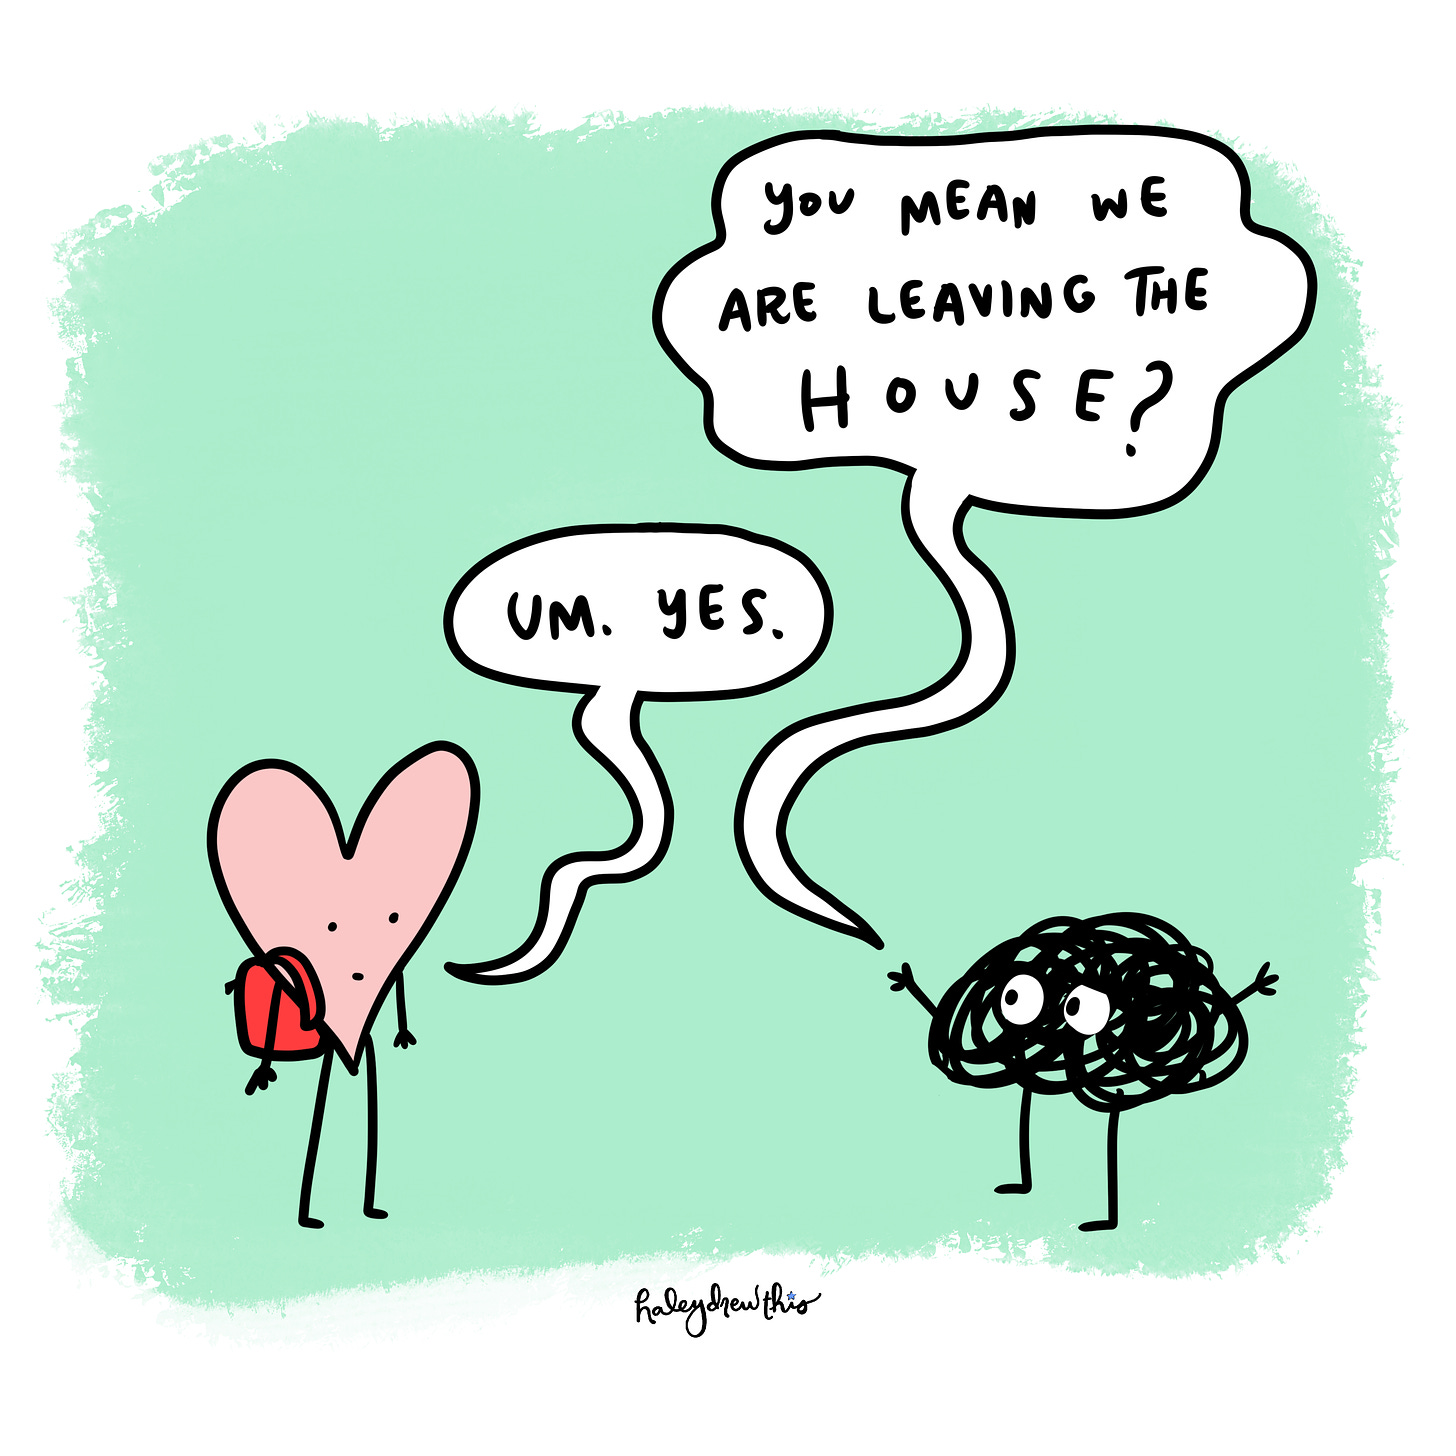 Anxiety says: You mean we are leaving the house? Pink heart: Um, yes.